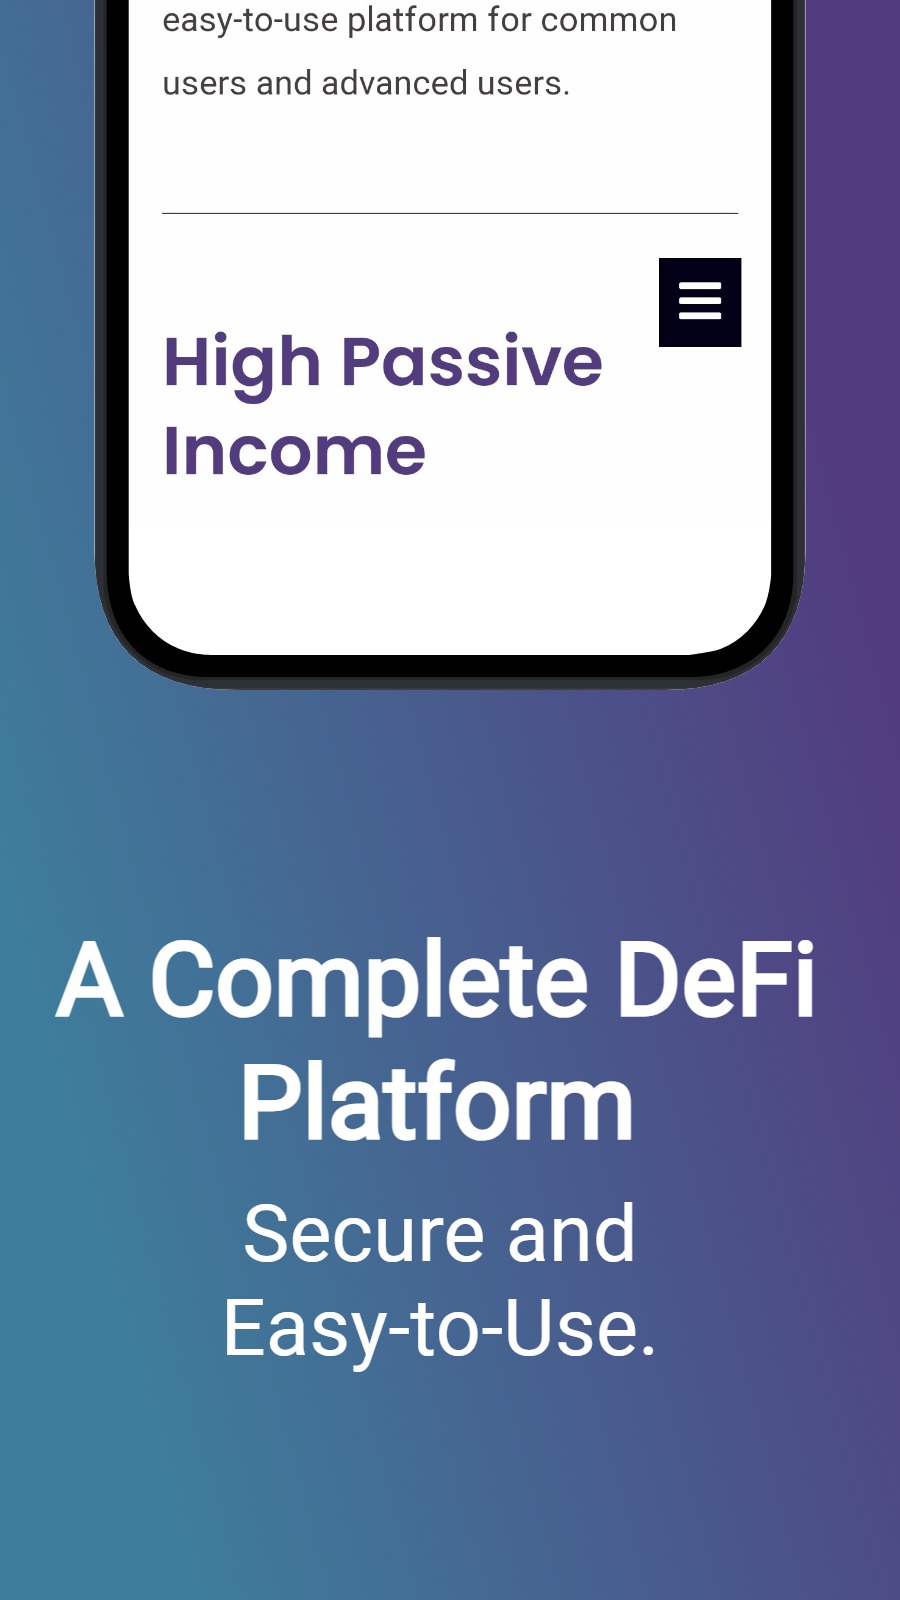 A Complete DeFi Platform - Secure and Easy-to-Use.